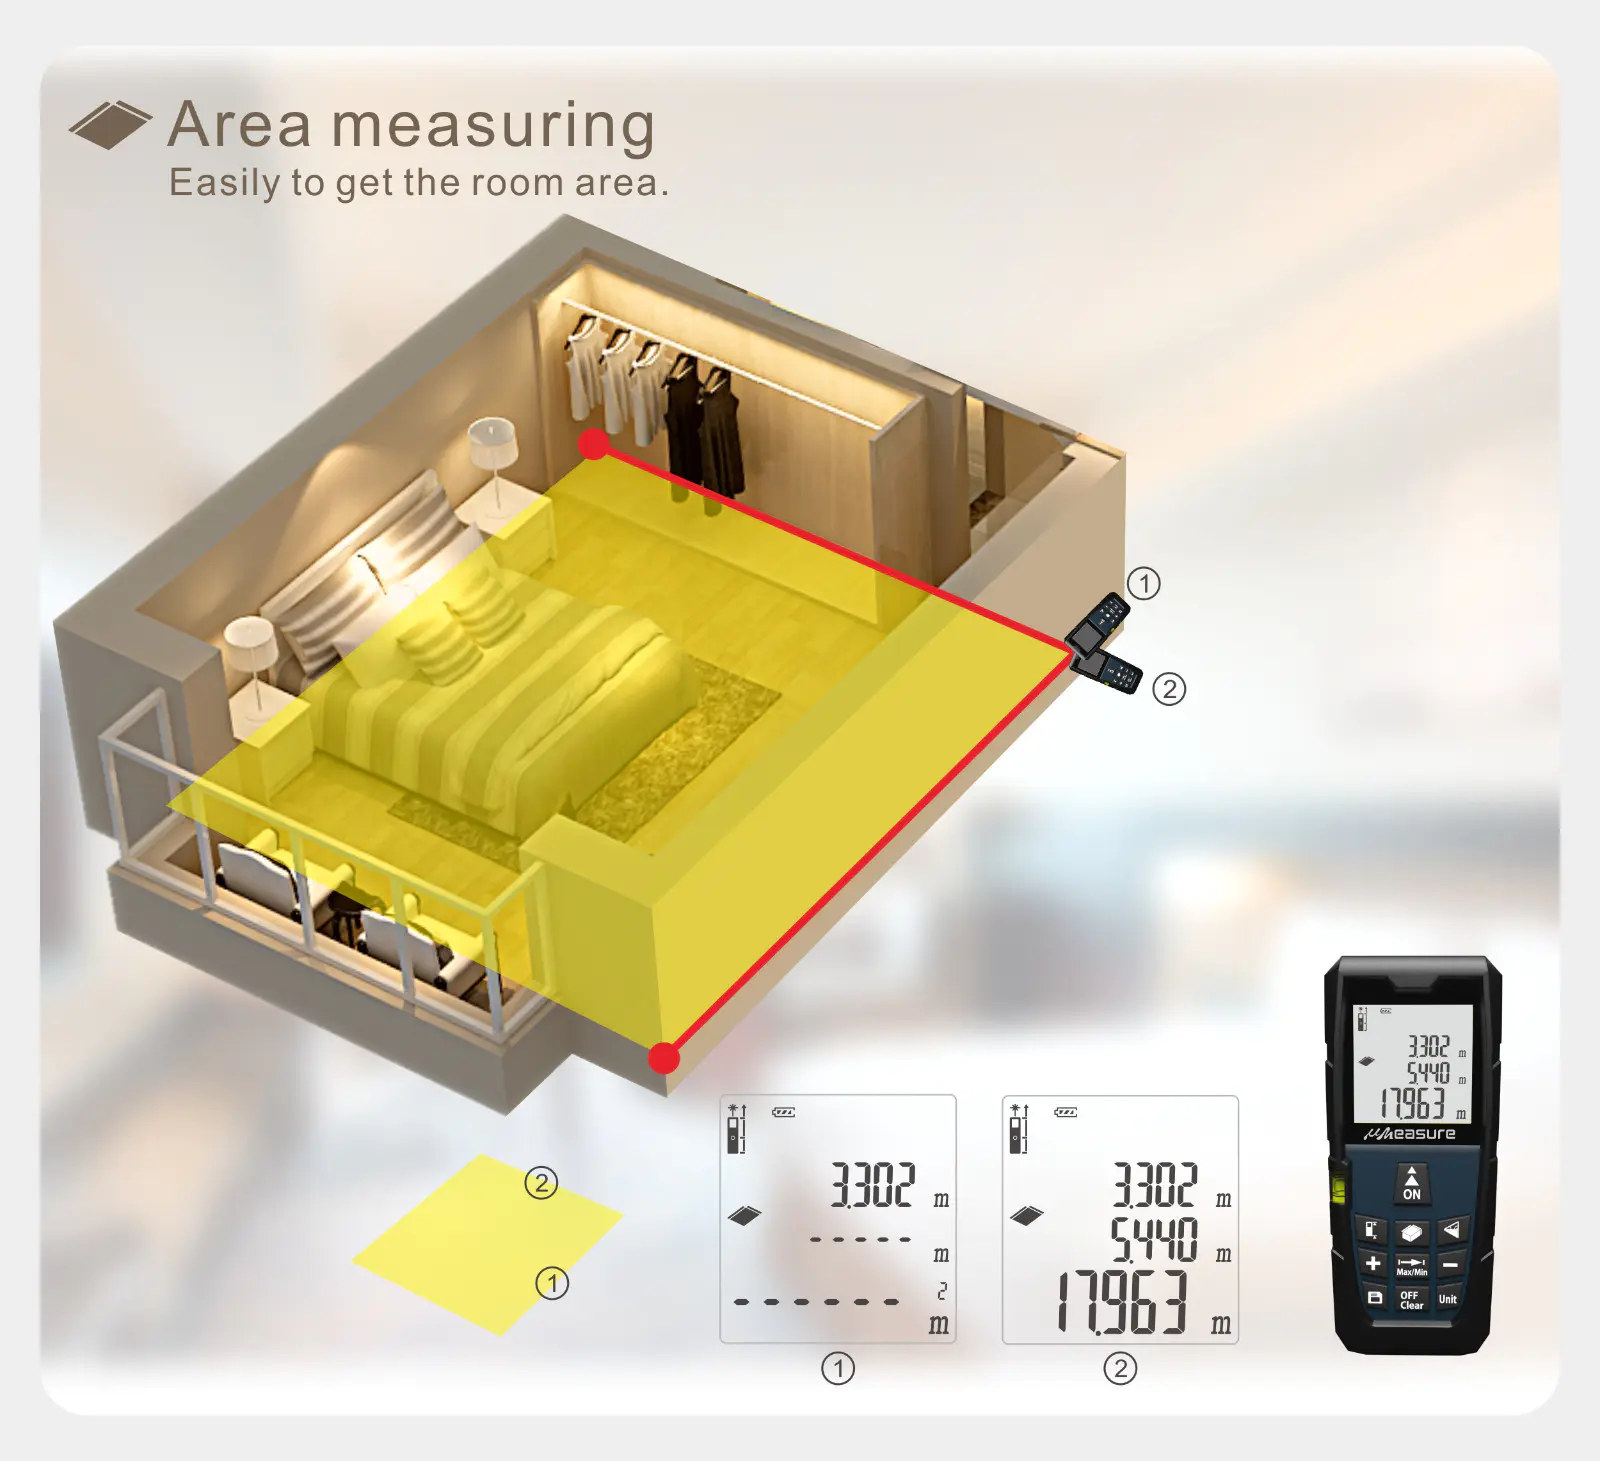 UMeasure cross laser distance measurer high-accuracy for wholesale